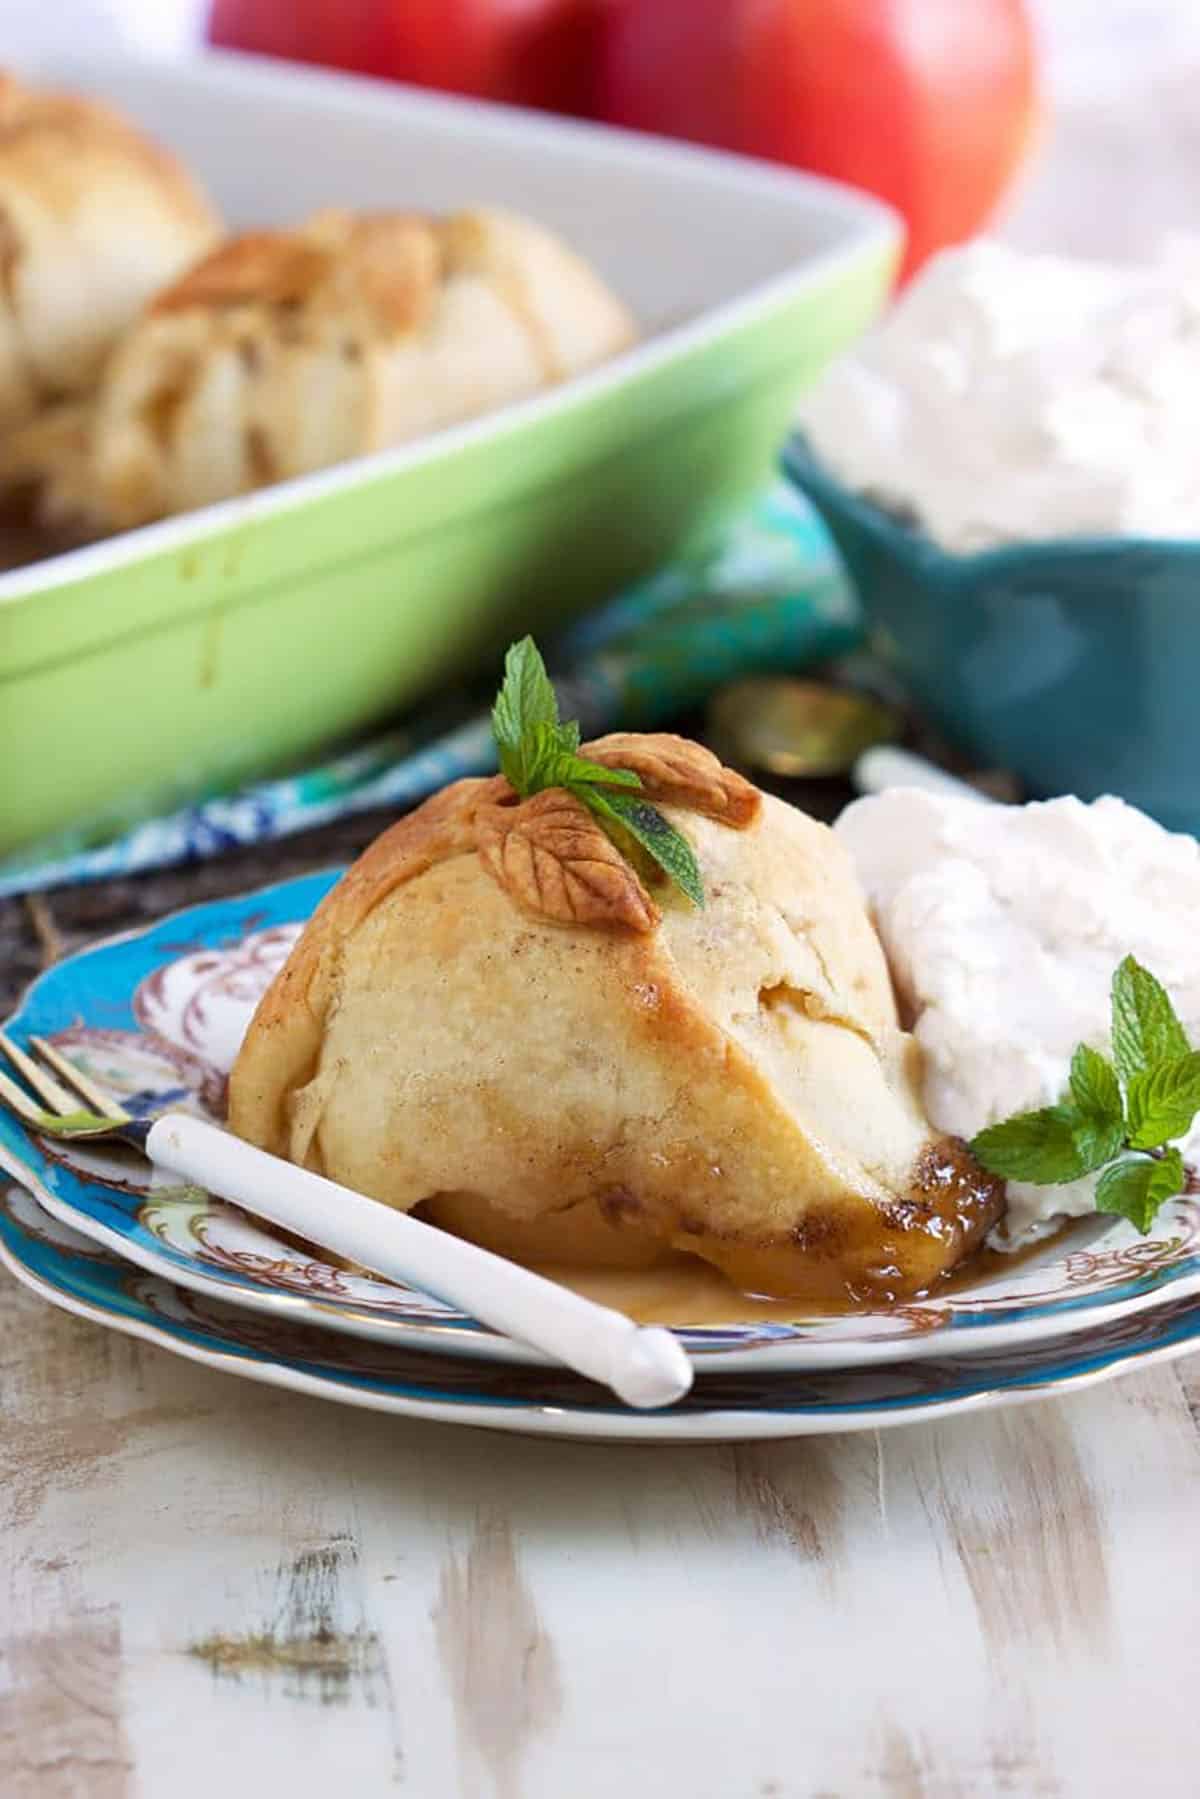 Apple Dumpling on a blue and white plate with a scoop of vanilla ice cream and a white spoon.